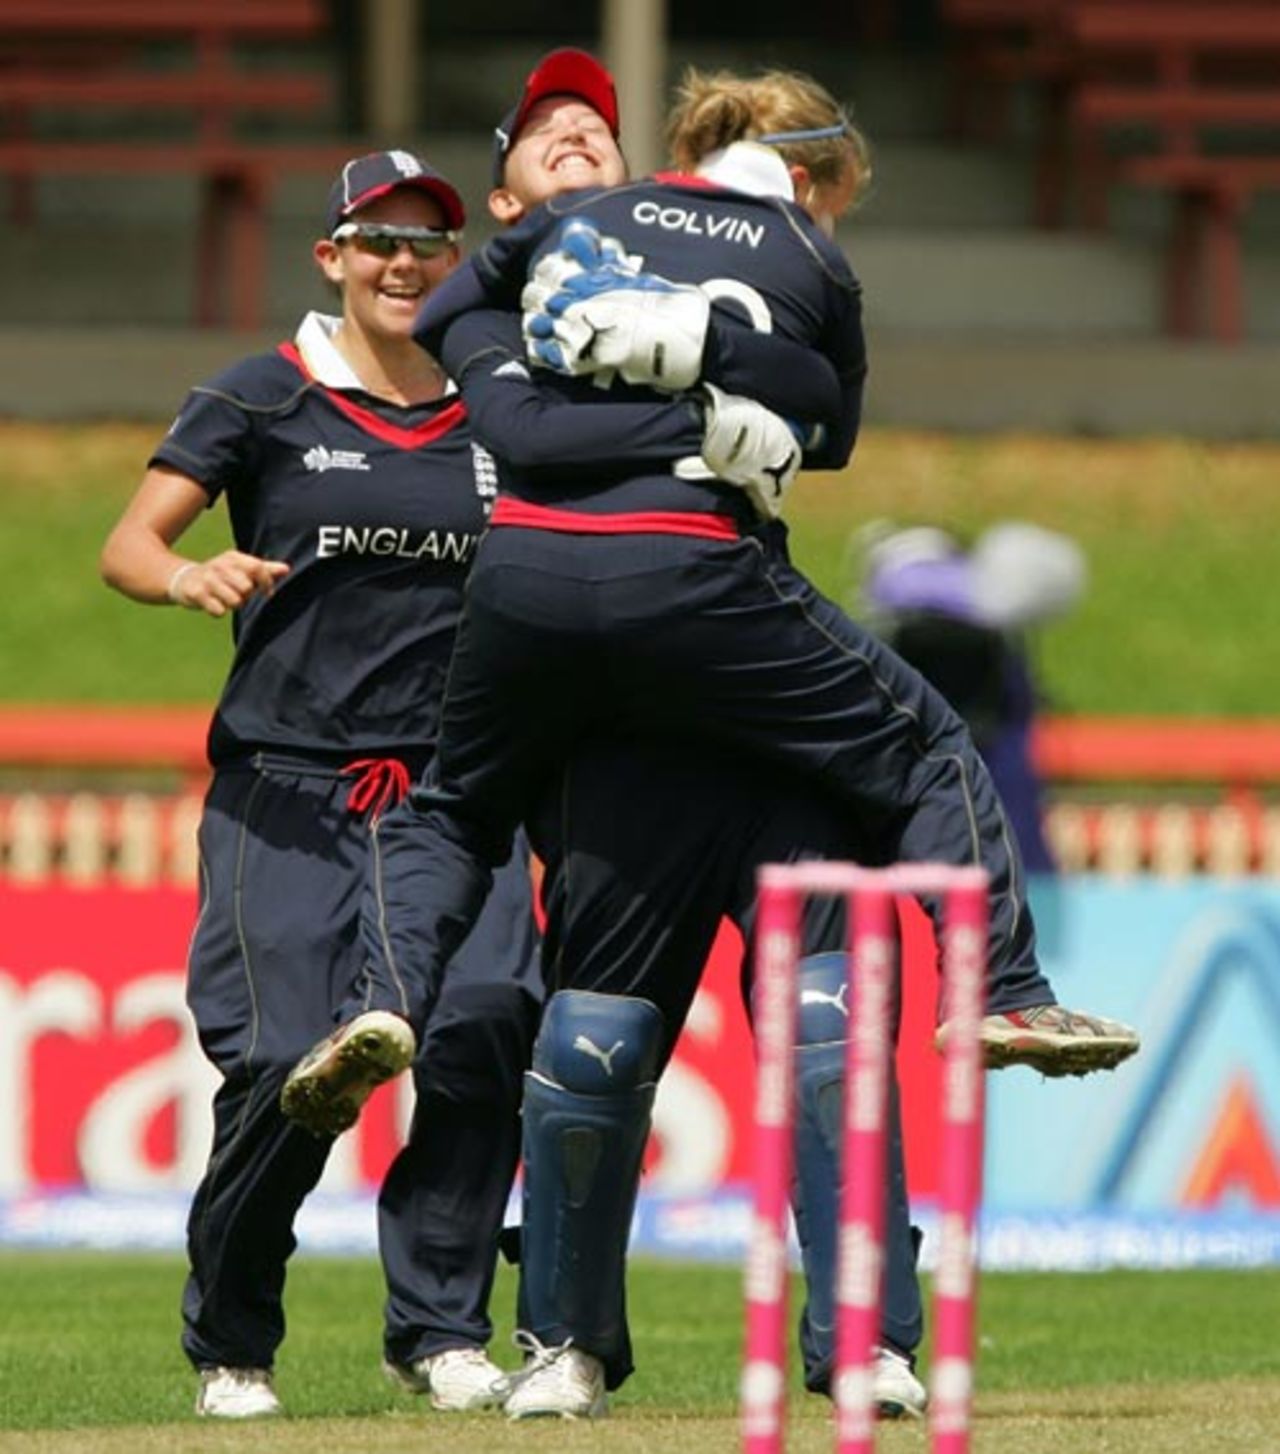 Wicketkeeper Sarah Taylor and Holly Colvin celebrate taking the wicket of Rumeli Dhar, England v India, Group B, women's World Cup, Sydney, March 10, 2009
